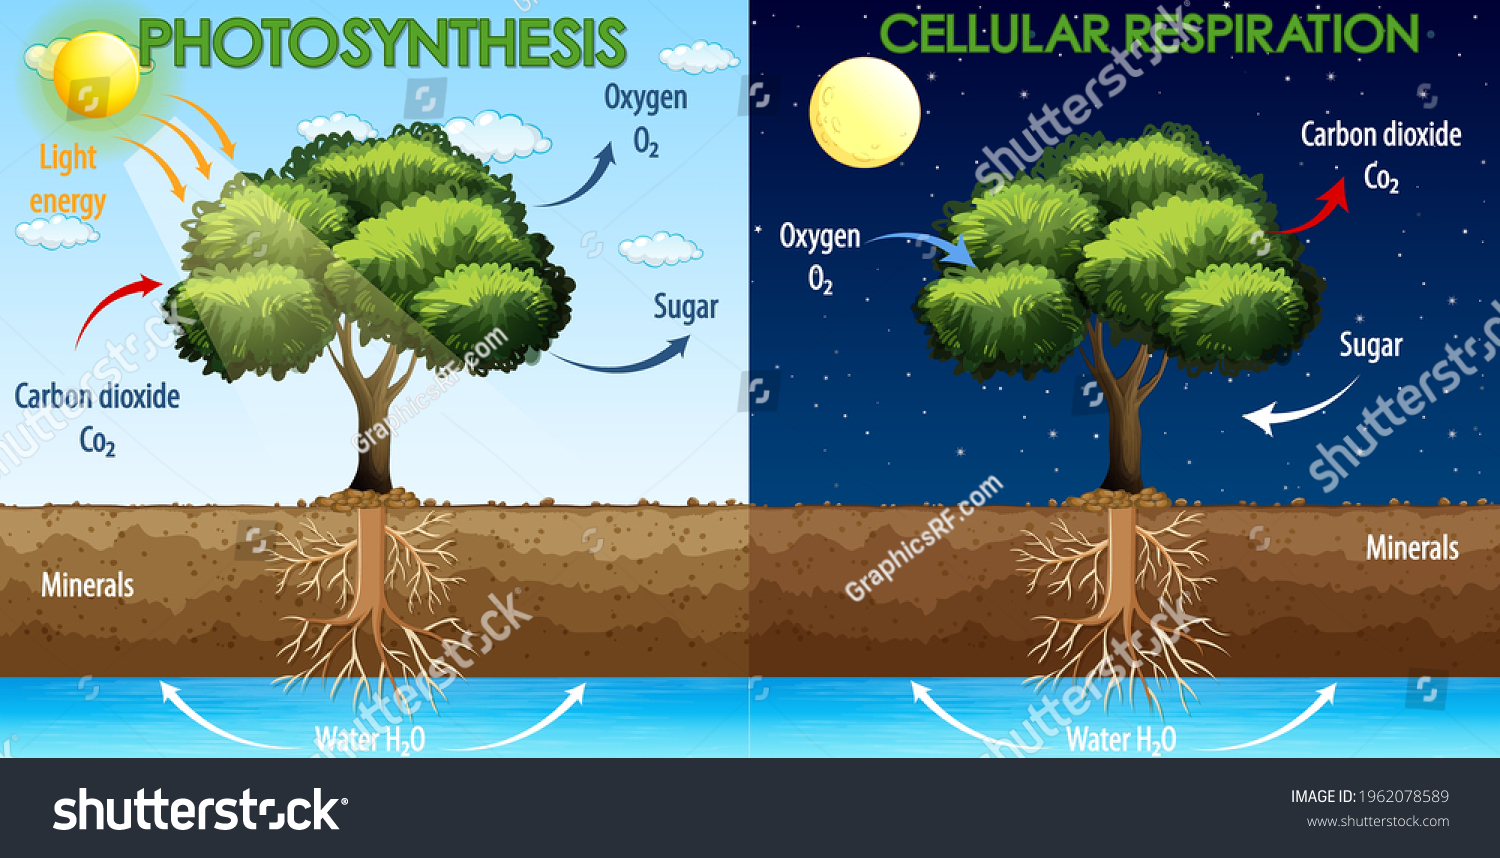 Diagram showing process of photosynthesis and cellular respiration illustration #1962078589